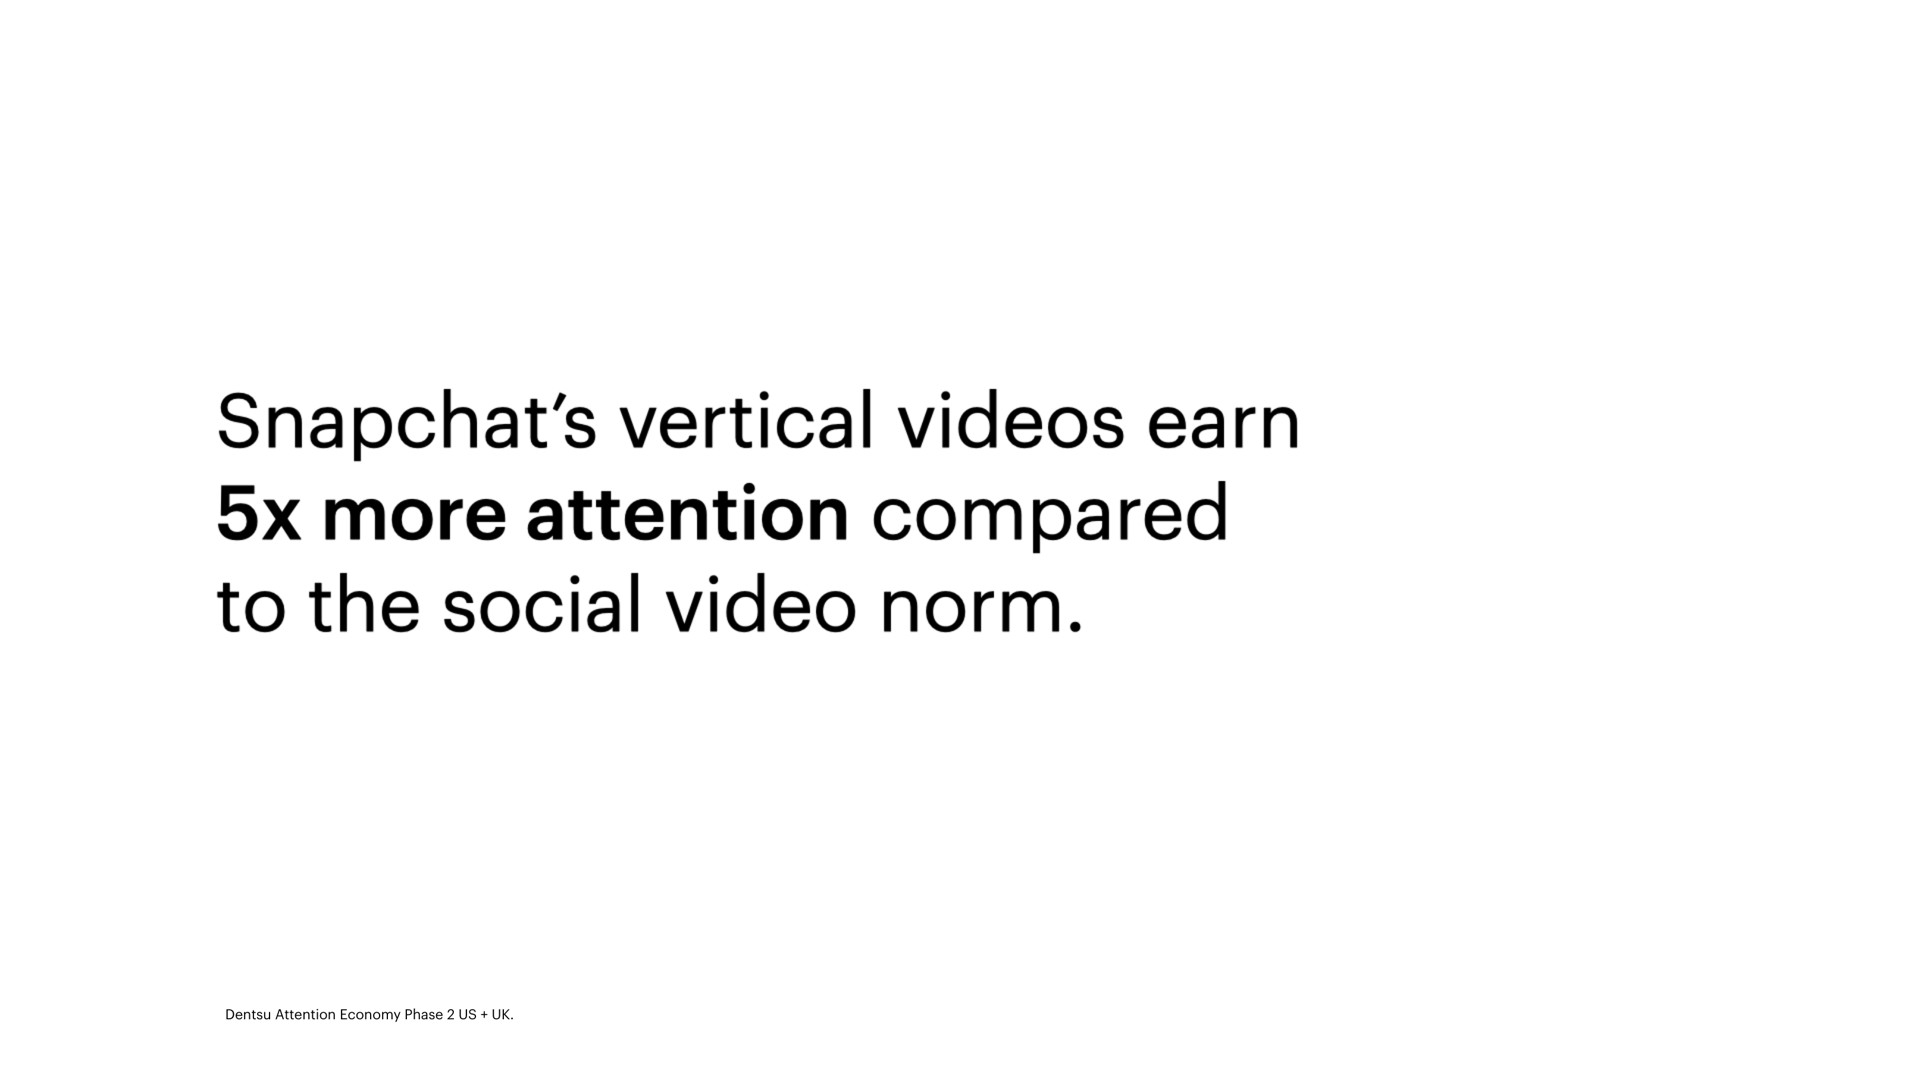 vertical videos earn more attention compared to the social video norm | Snap Inc